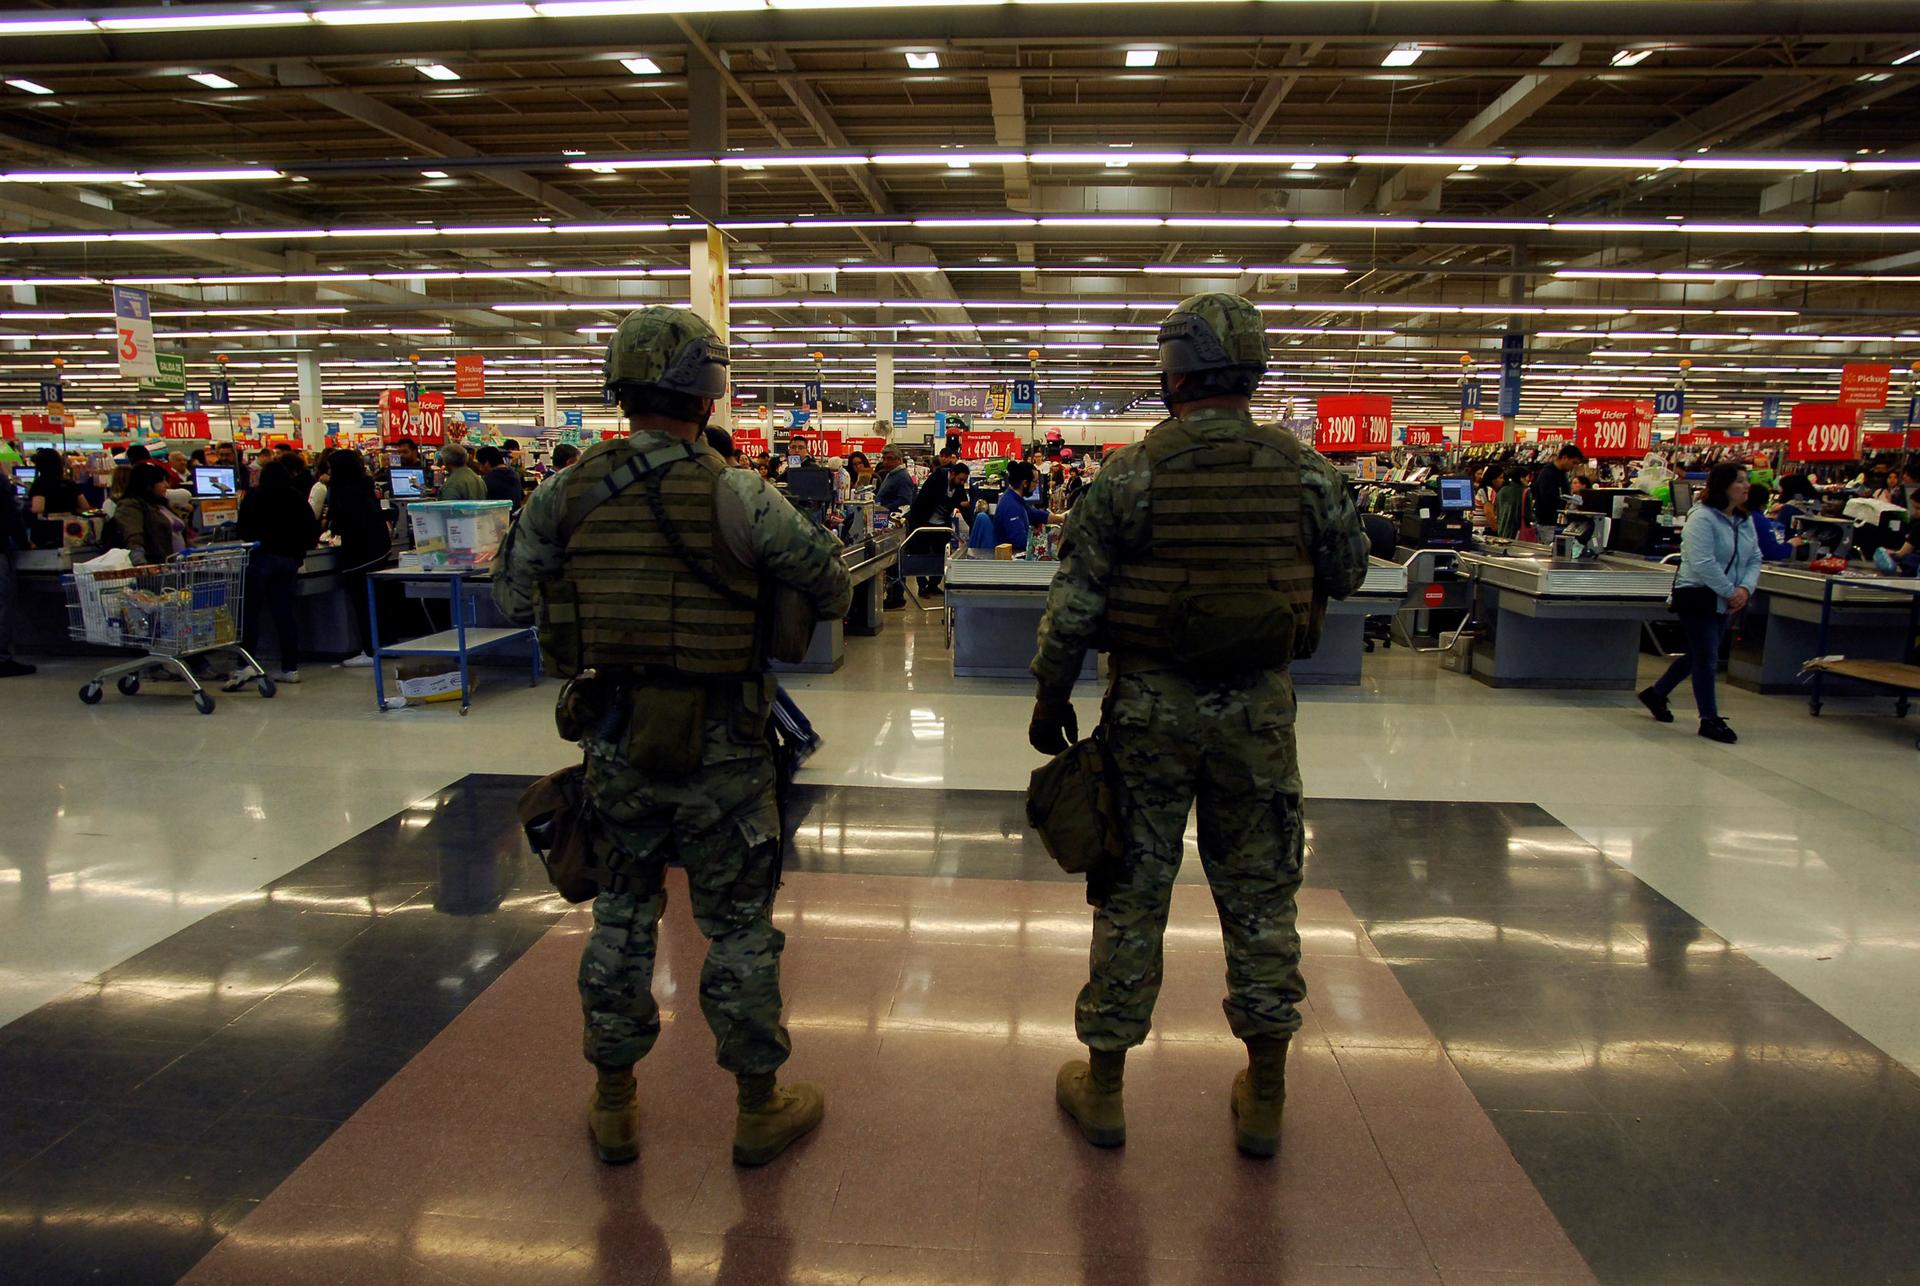 Soldiers are shown stand guard wearing full combat armor and helmets with supermarket checkout lines in the background.